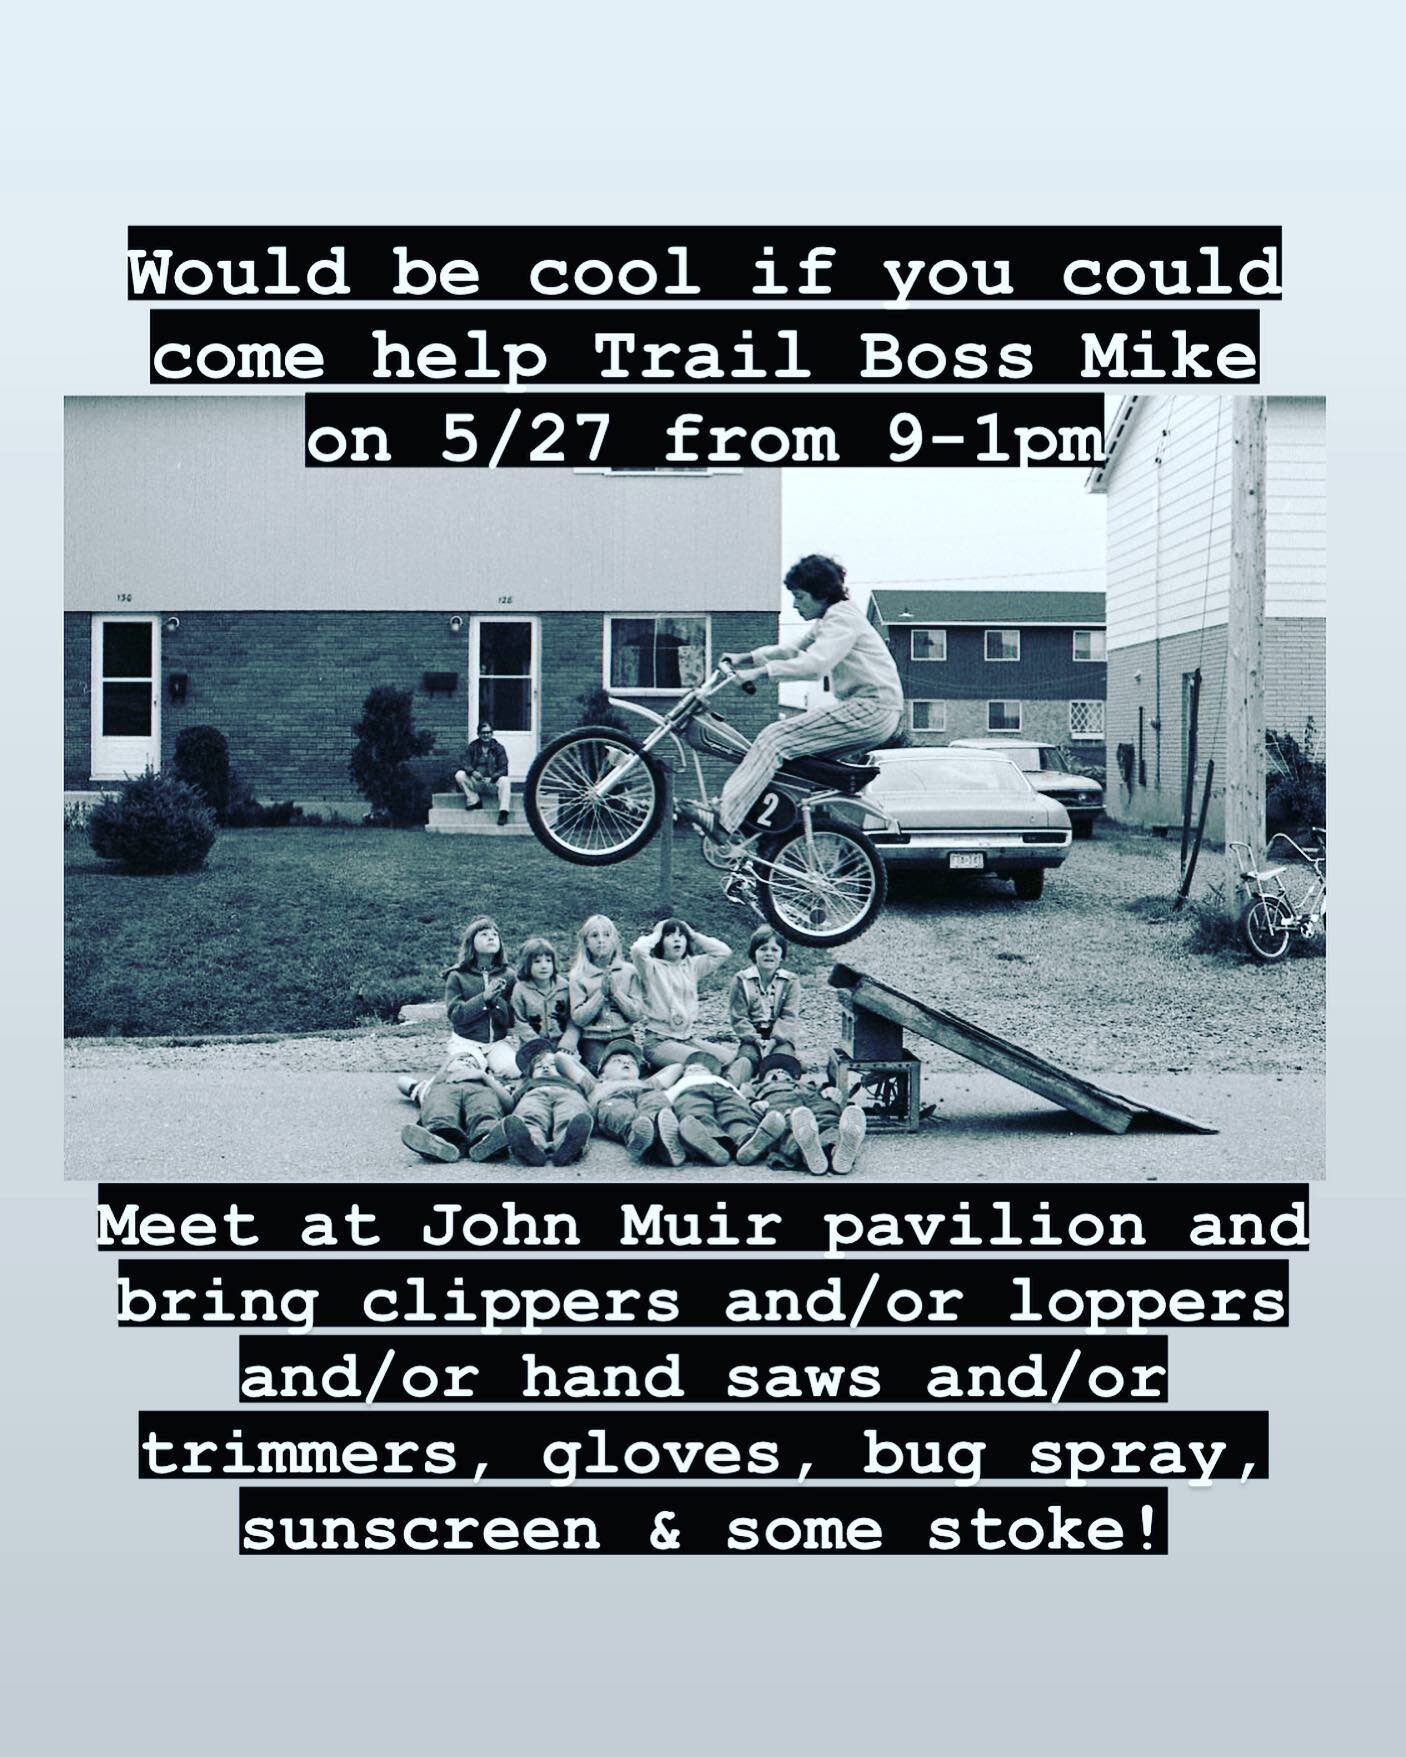 ***EDIT 8am-Noon!!!!
Possibly/Maybe/Probably not actual footage of Trail Boss Mark building his 1st trail, but none the less, you will be in awe of his trail maintenance skills if you can make it out 5/27 from 8am-Noon.  Bring some hand tools and a s